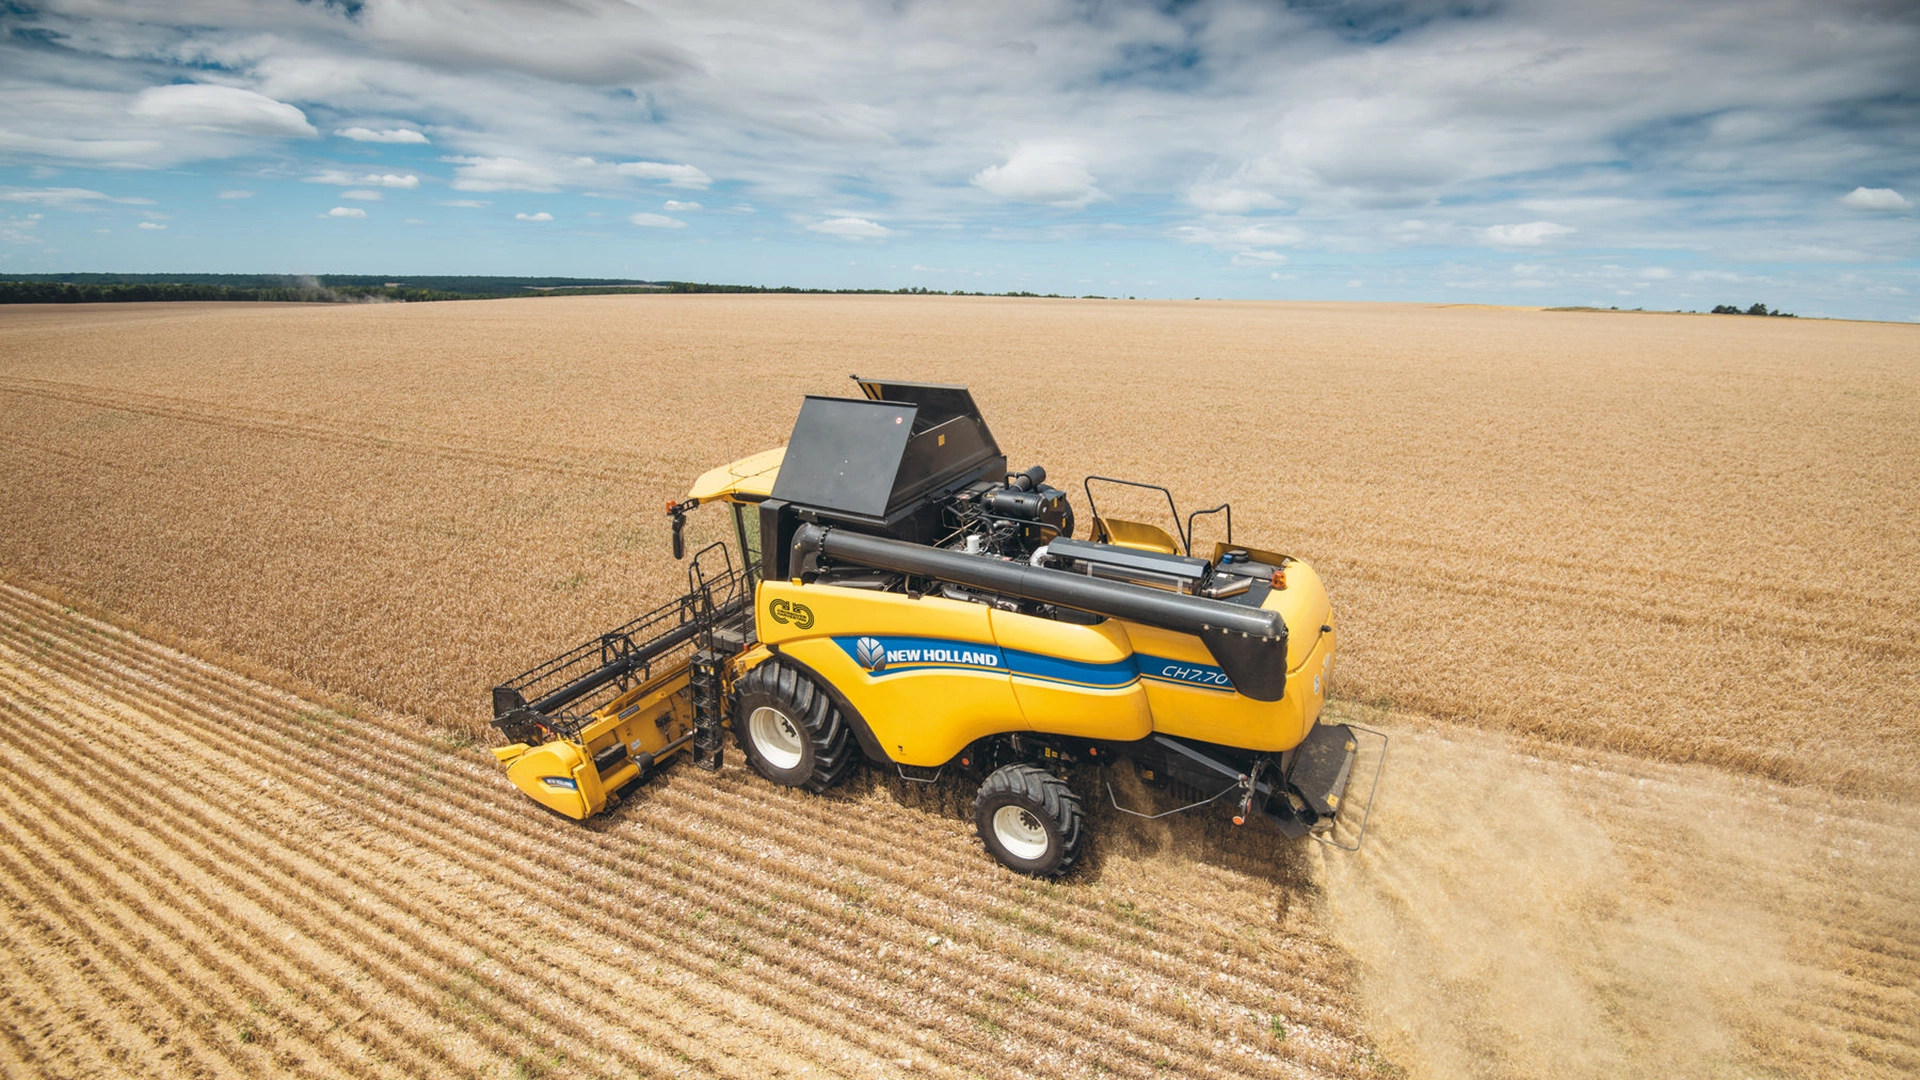 New Holland CH Combine Harvester in action, efficiently harvesting with agricultural combine header